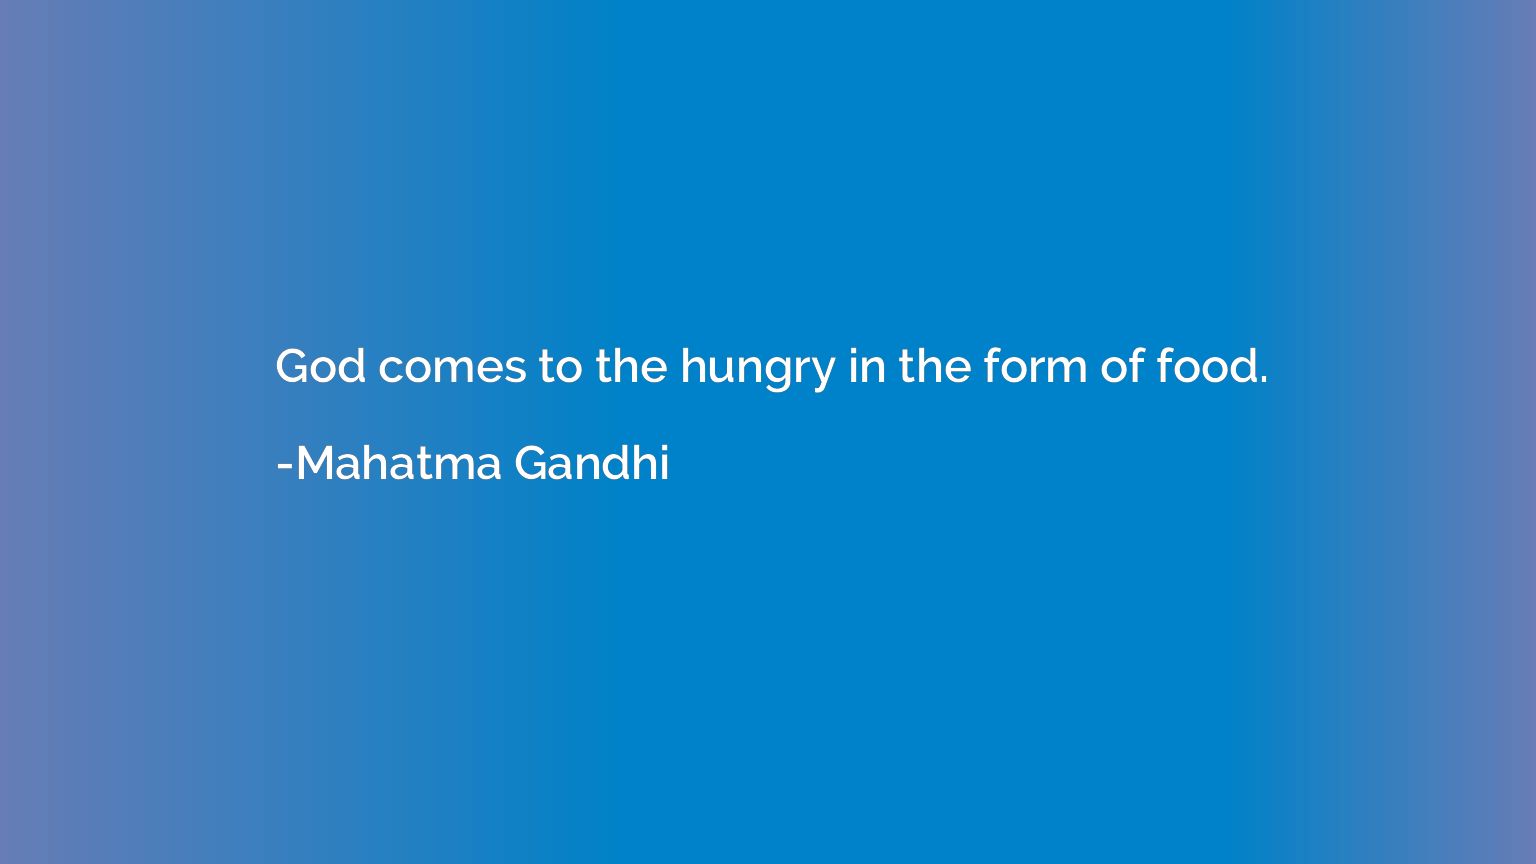 God comes to the hungry in the form of food.